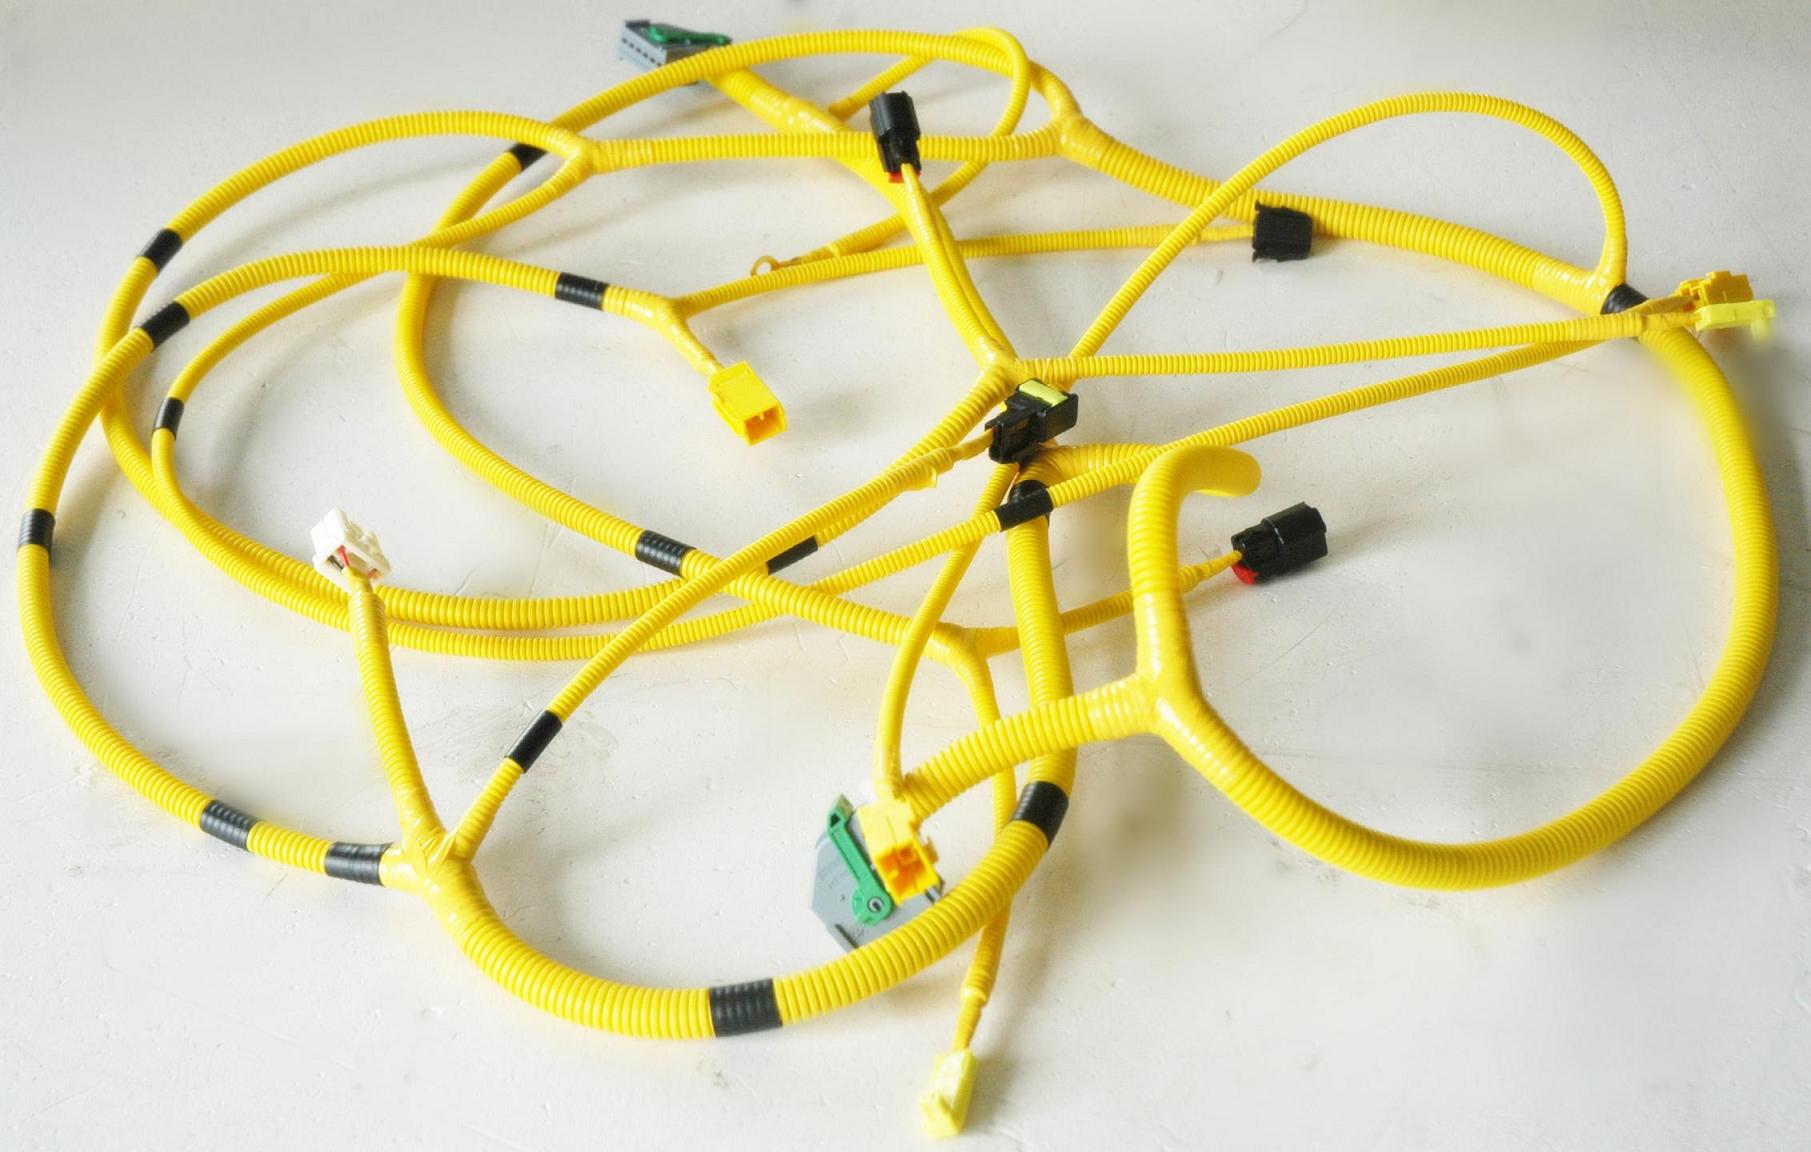 Main Harness for Auto Safety Airbag